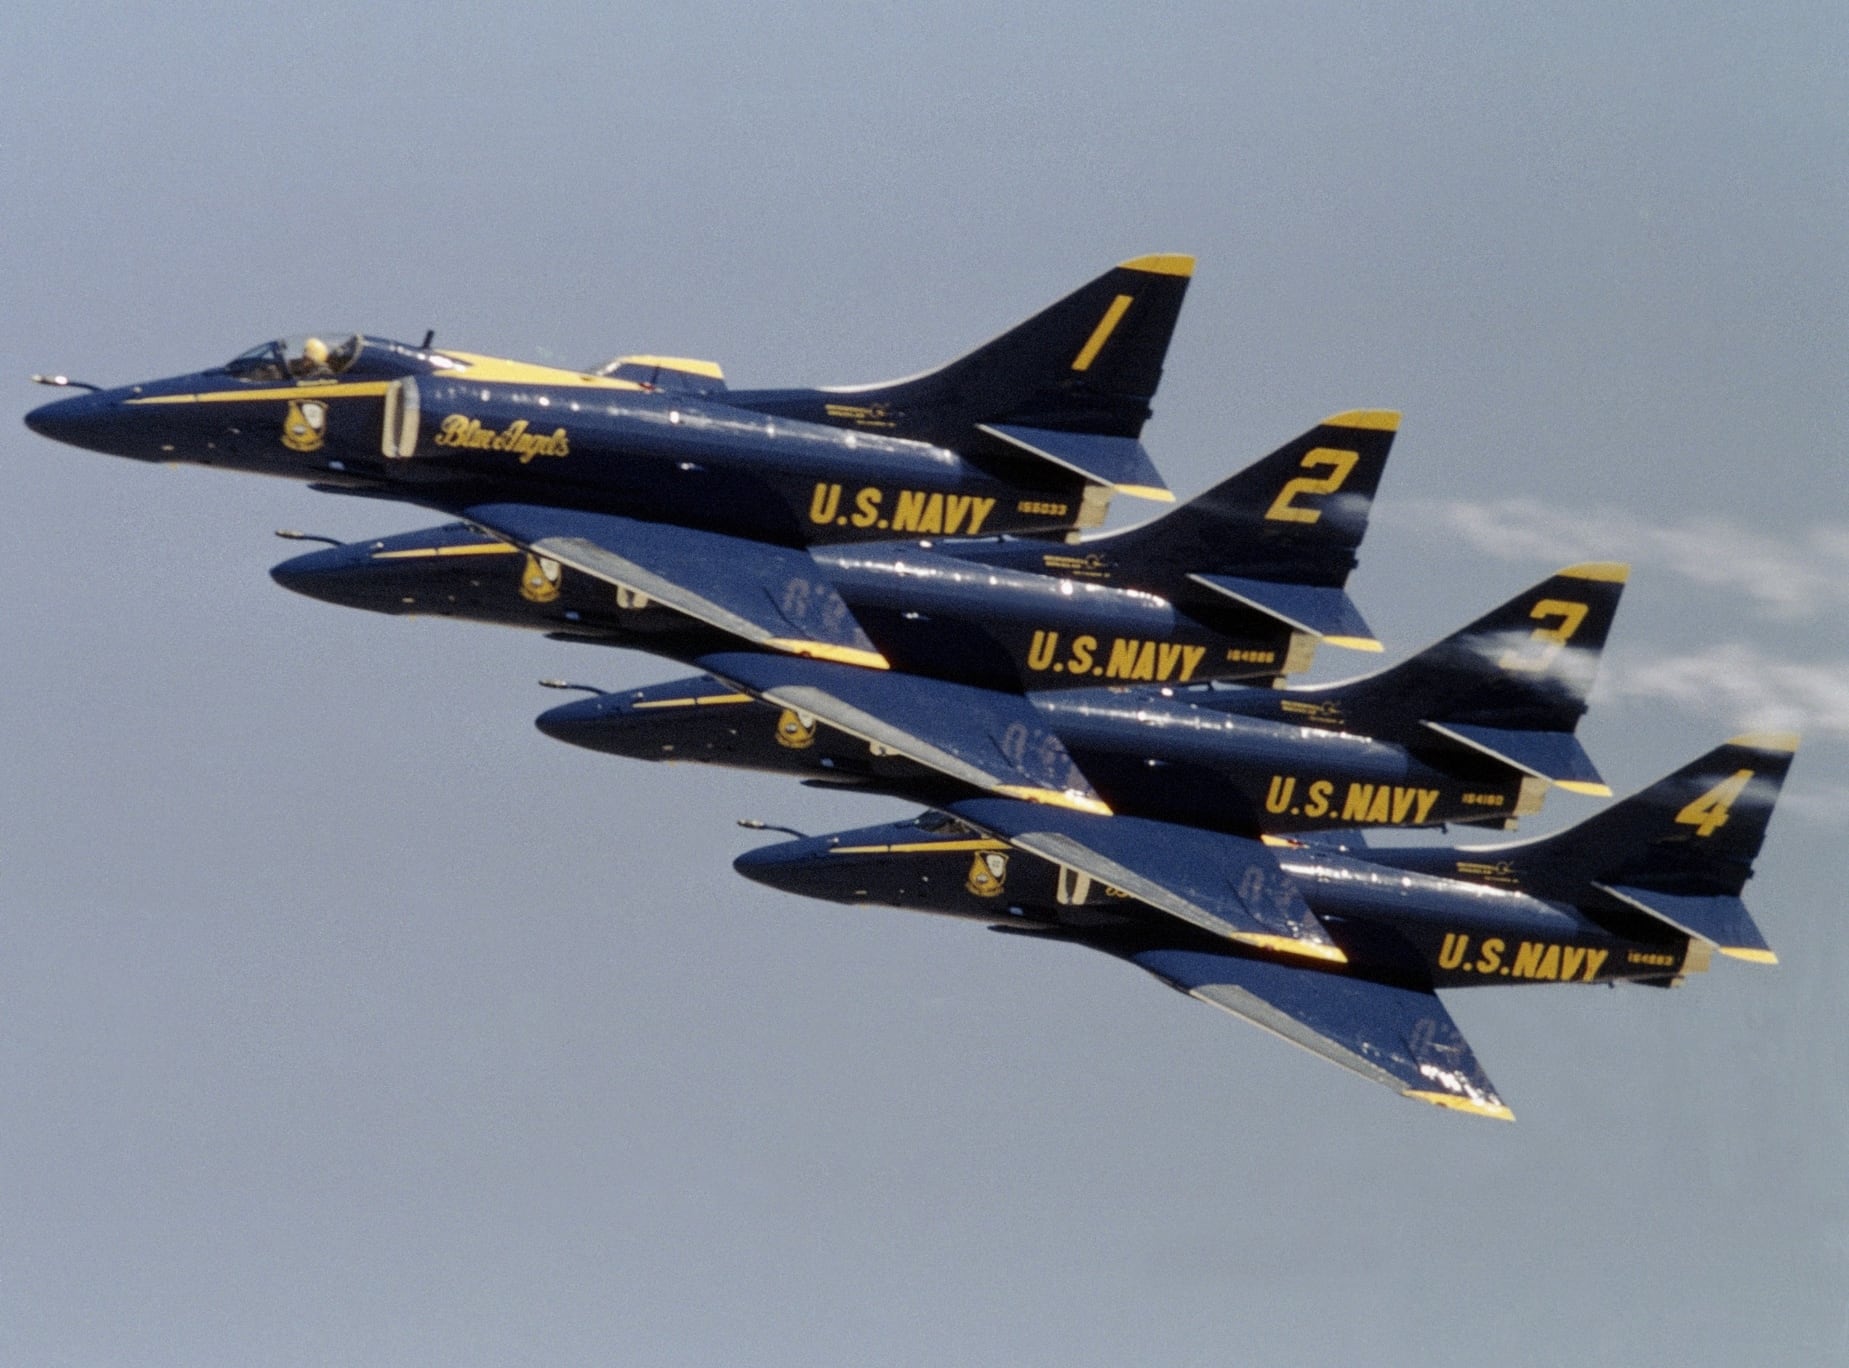 Blue angels flying in formation.